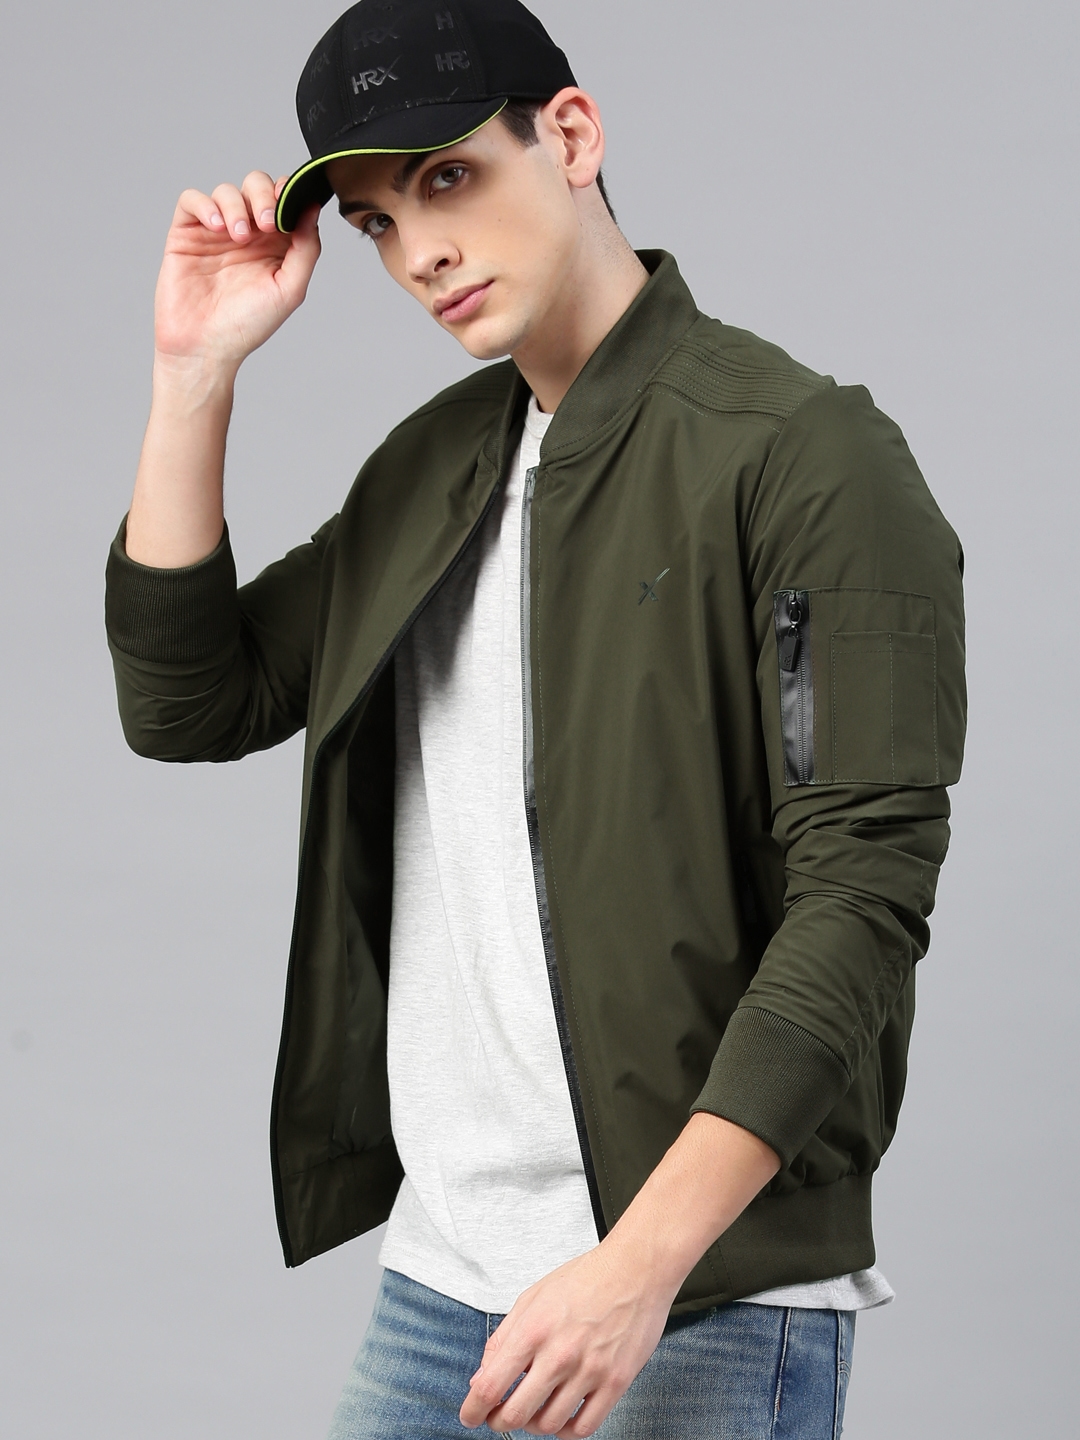 Top more than 198 hrx jackets for men best